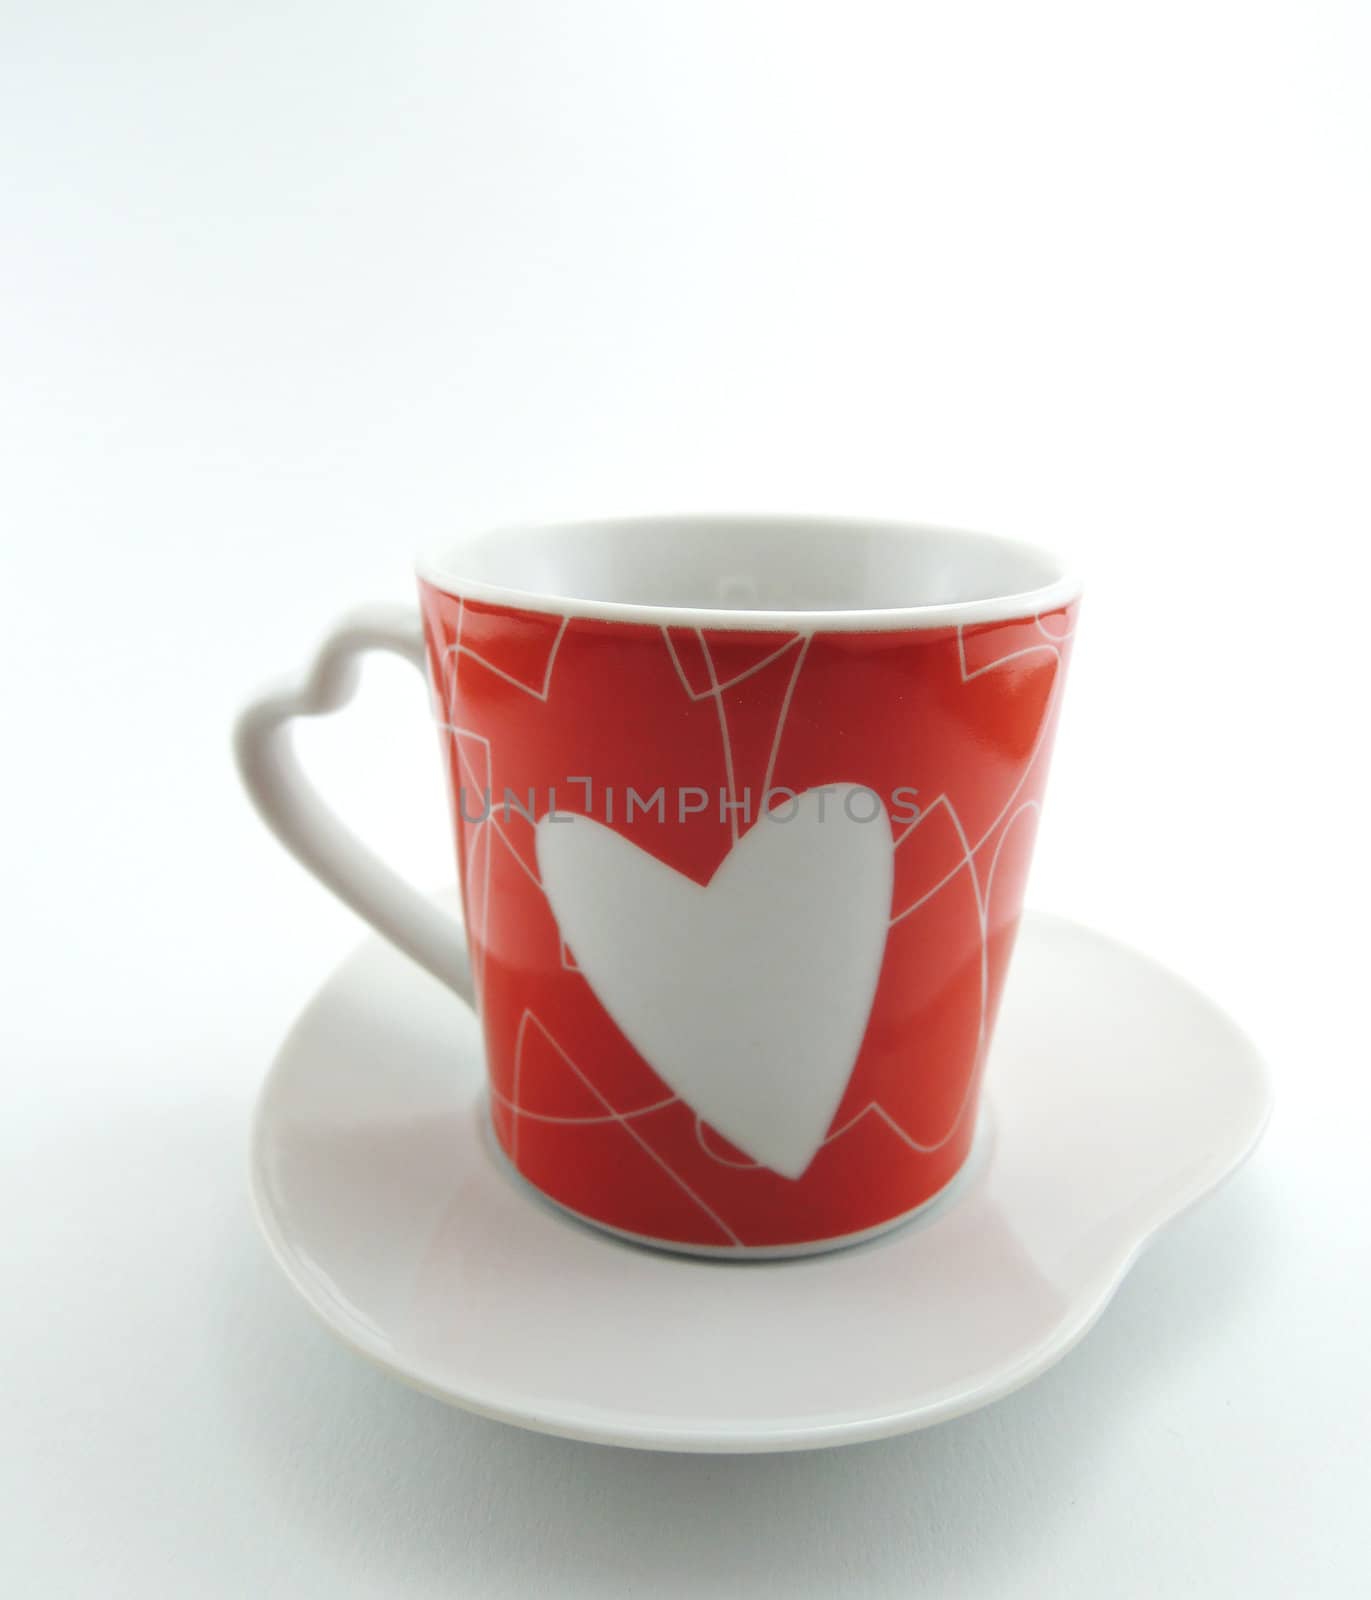 Cup with red heart for coffee by MalyDesigner